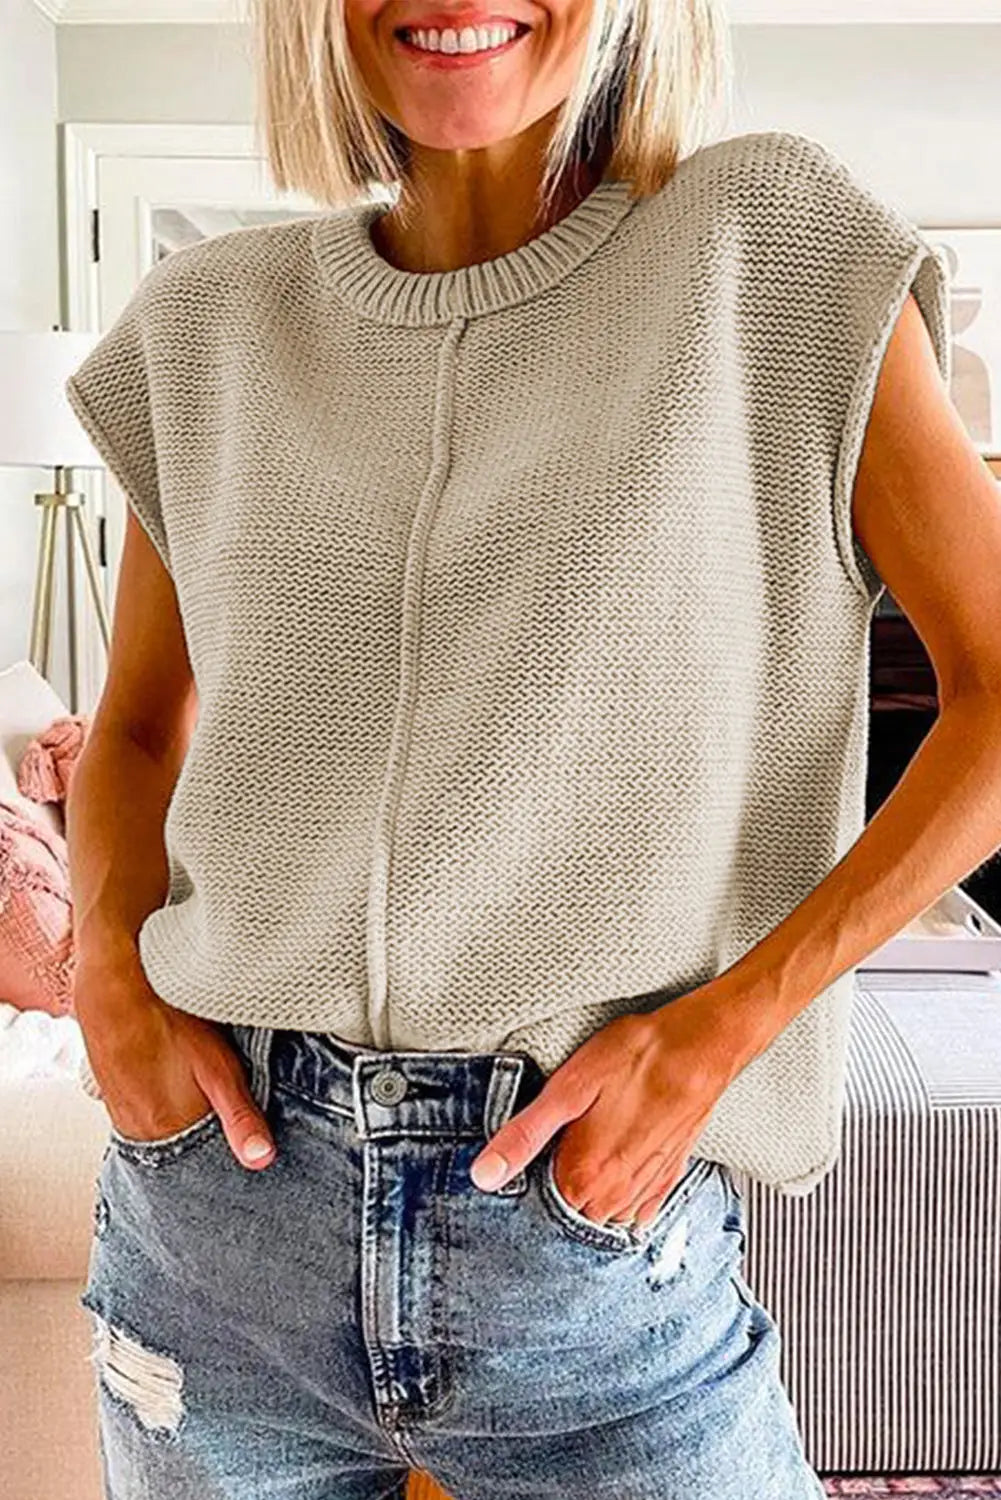 Oatmeal solid color cap sleeve knitted sweater - l / 60% cotton + 40% acrylic - sweaters & cardigans